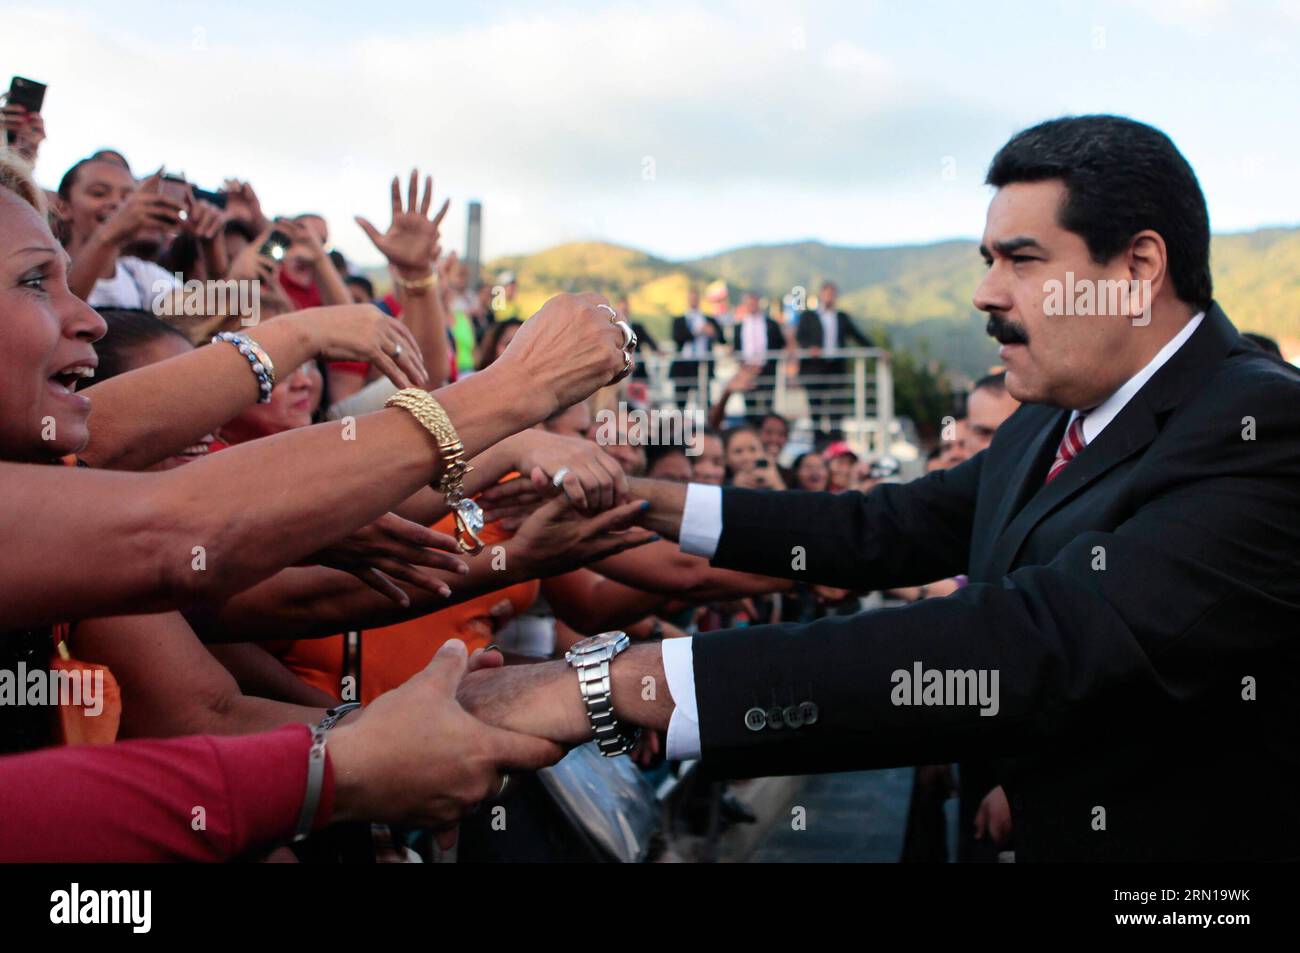 CARACAS, Dec. 9, 2014 -- Image provided by shows Venezuelan President Nicolas Maduro (R) meeting with people ahead of a ceremony marking the 190th anniversary of the Battle of Ayacucho, at the National Pantheon in Caracas, Venezuela, on Dec. 9, 2014. ) VENEZUELA-CARACAS-POLITICS-MADURO VENEZUELA SxPRESIDENCY PUBLICATIONxNOTxINxCHN   Caracas DEC 9 2014 Image provided by Shows Venezuelan President Nicolas Maduro r Meeting With Celebrities Ahead of a Ceremony marking The 190th Anniversary of The Battle of Ayacucho AT The National Pantheon in Caracas Venezuela ON DEC 9 2014 Venezuela Caracas POLIT Stock Photo